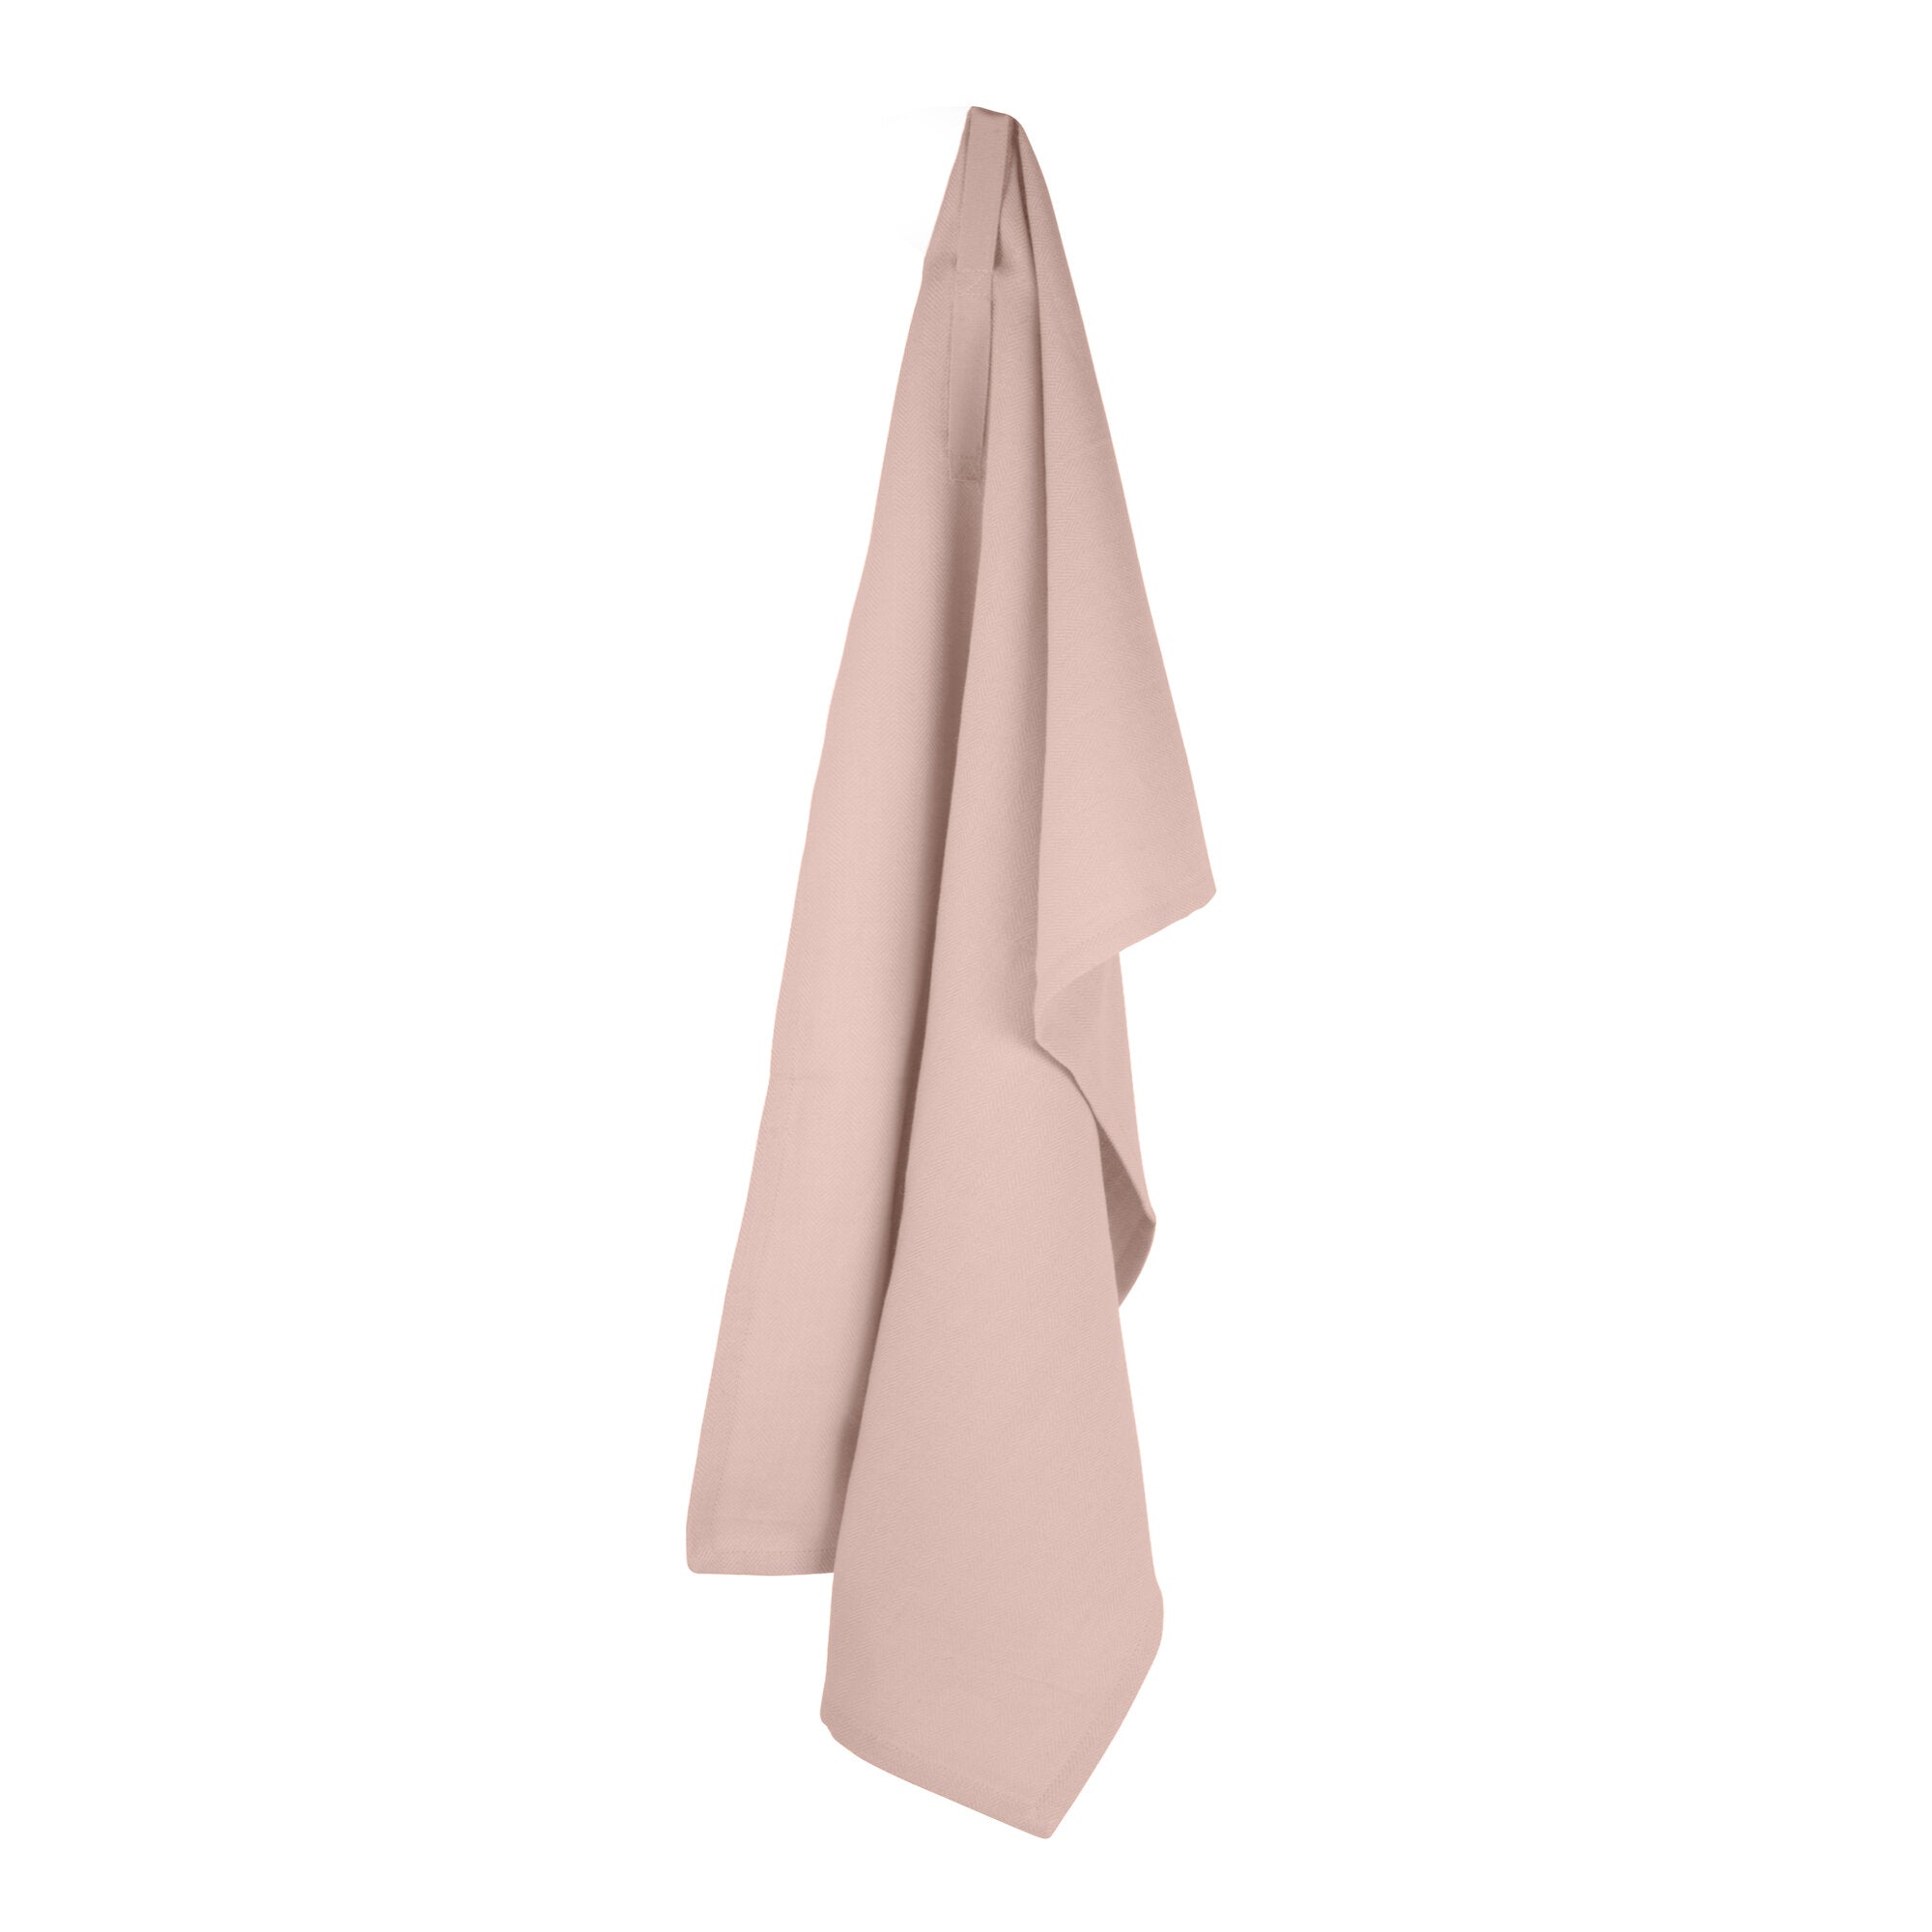 The Organic Company Kitchen Towel, Pale Rose